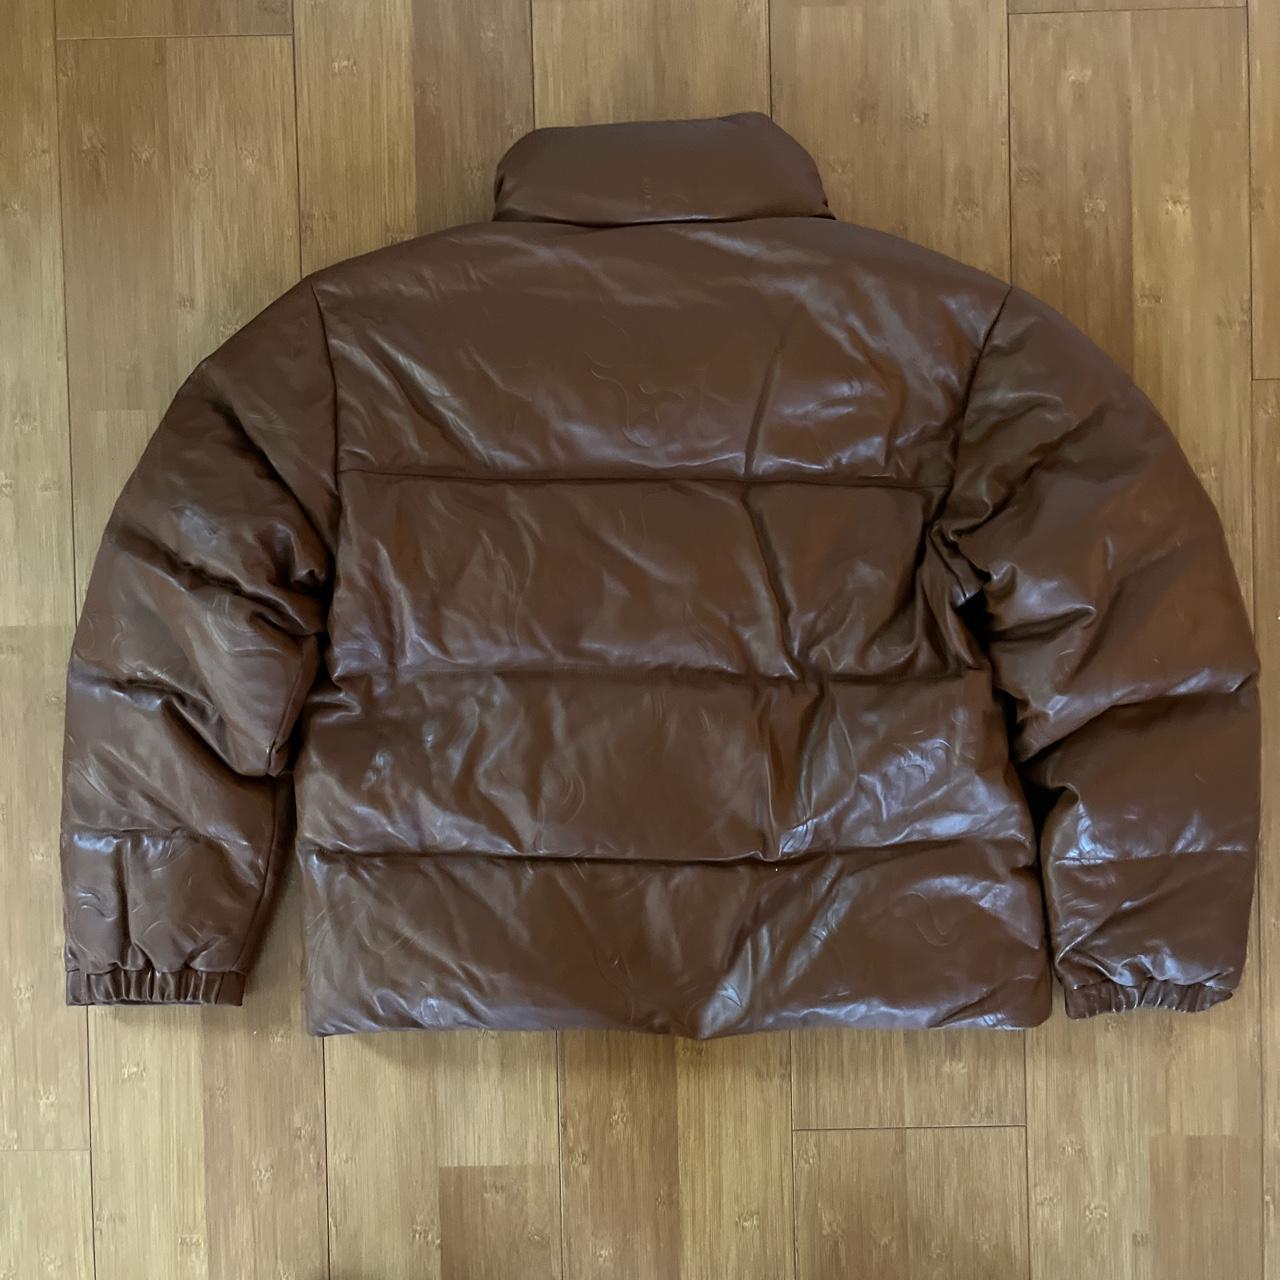 Golf Wang leather flame puffer jacket - brown.